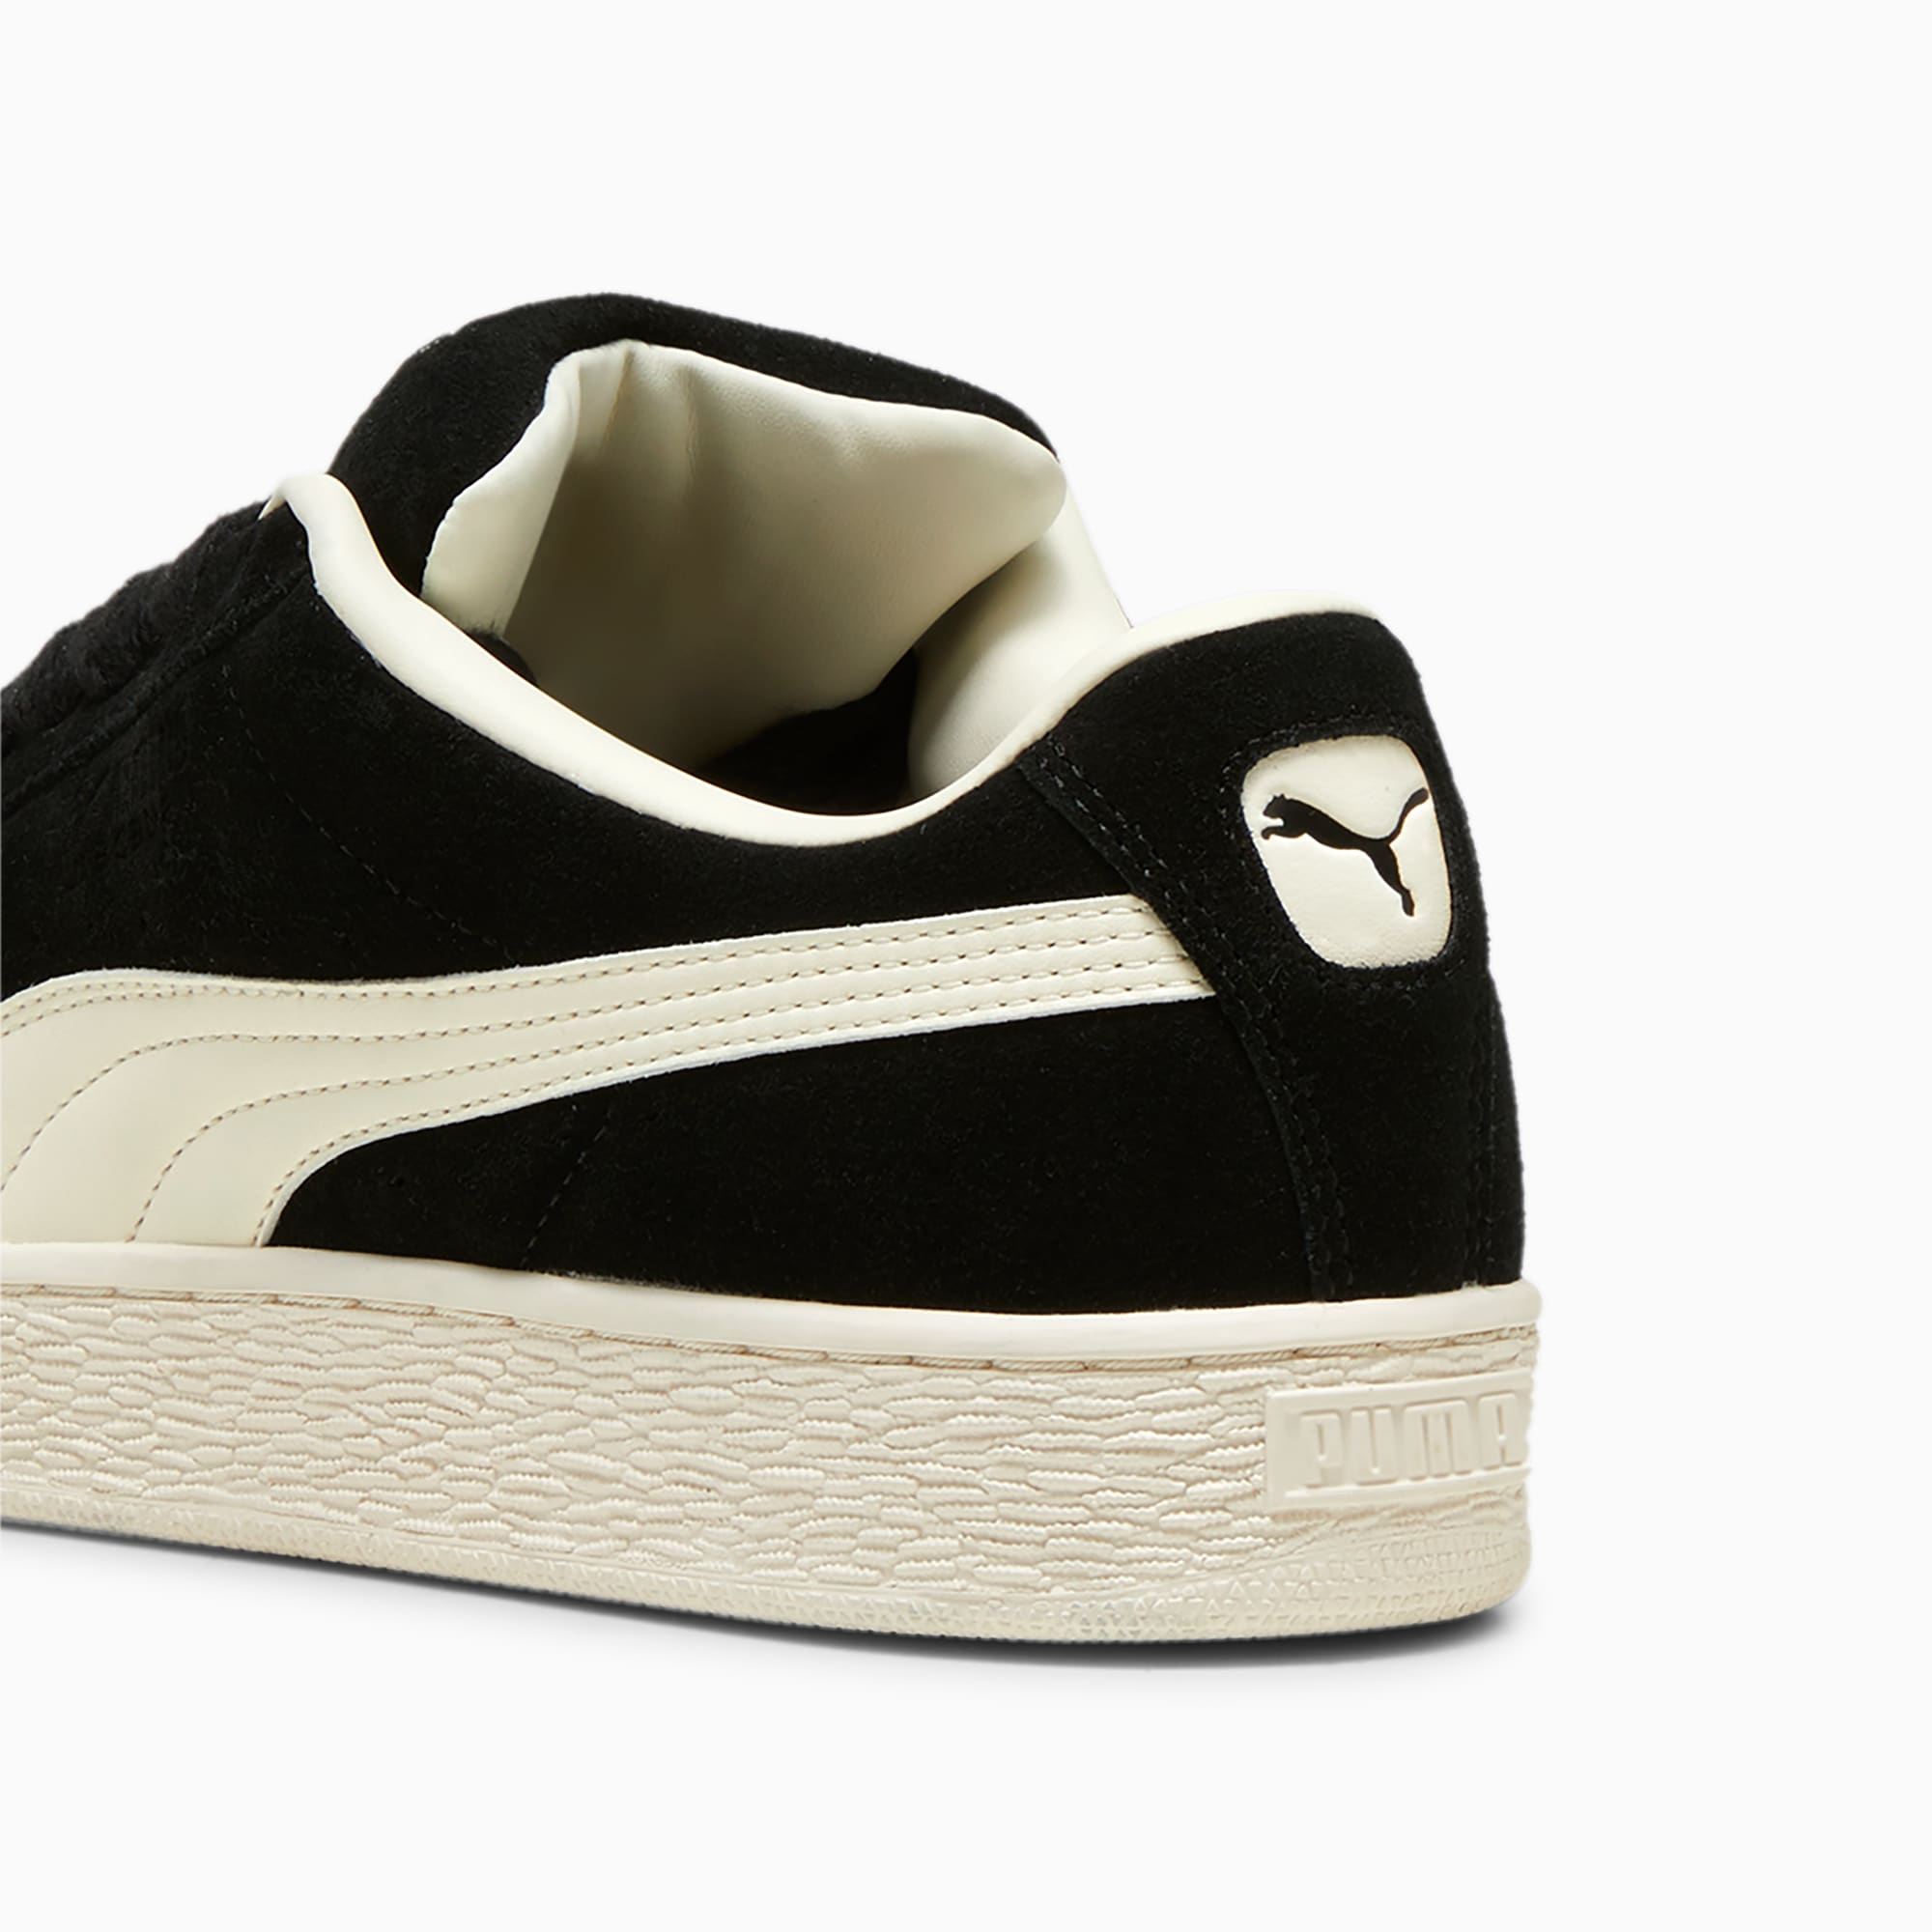 Women's PUMA X Pleasures Suede Xl Sneakers, Black/Frosted Ivory, Size 38,5, Shoes